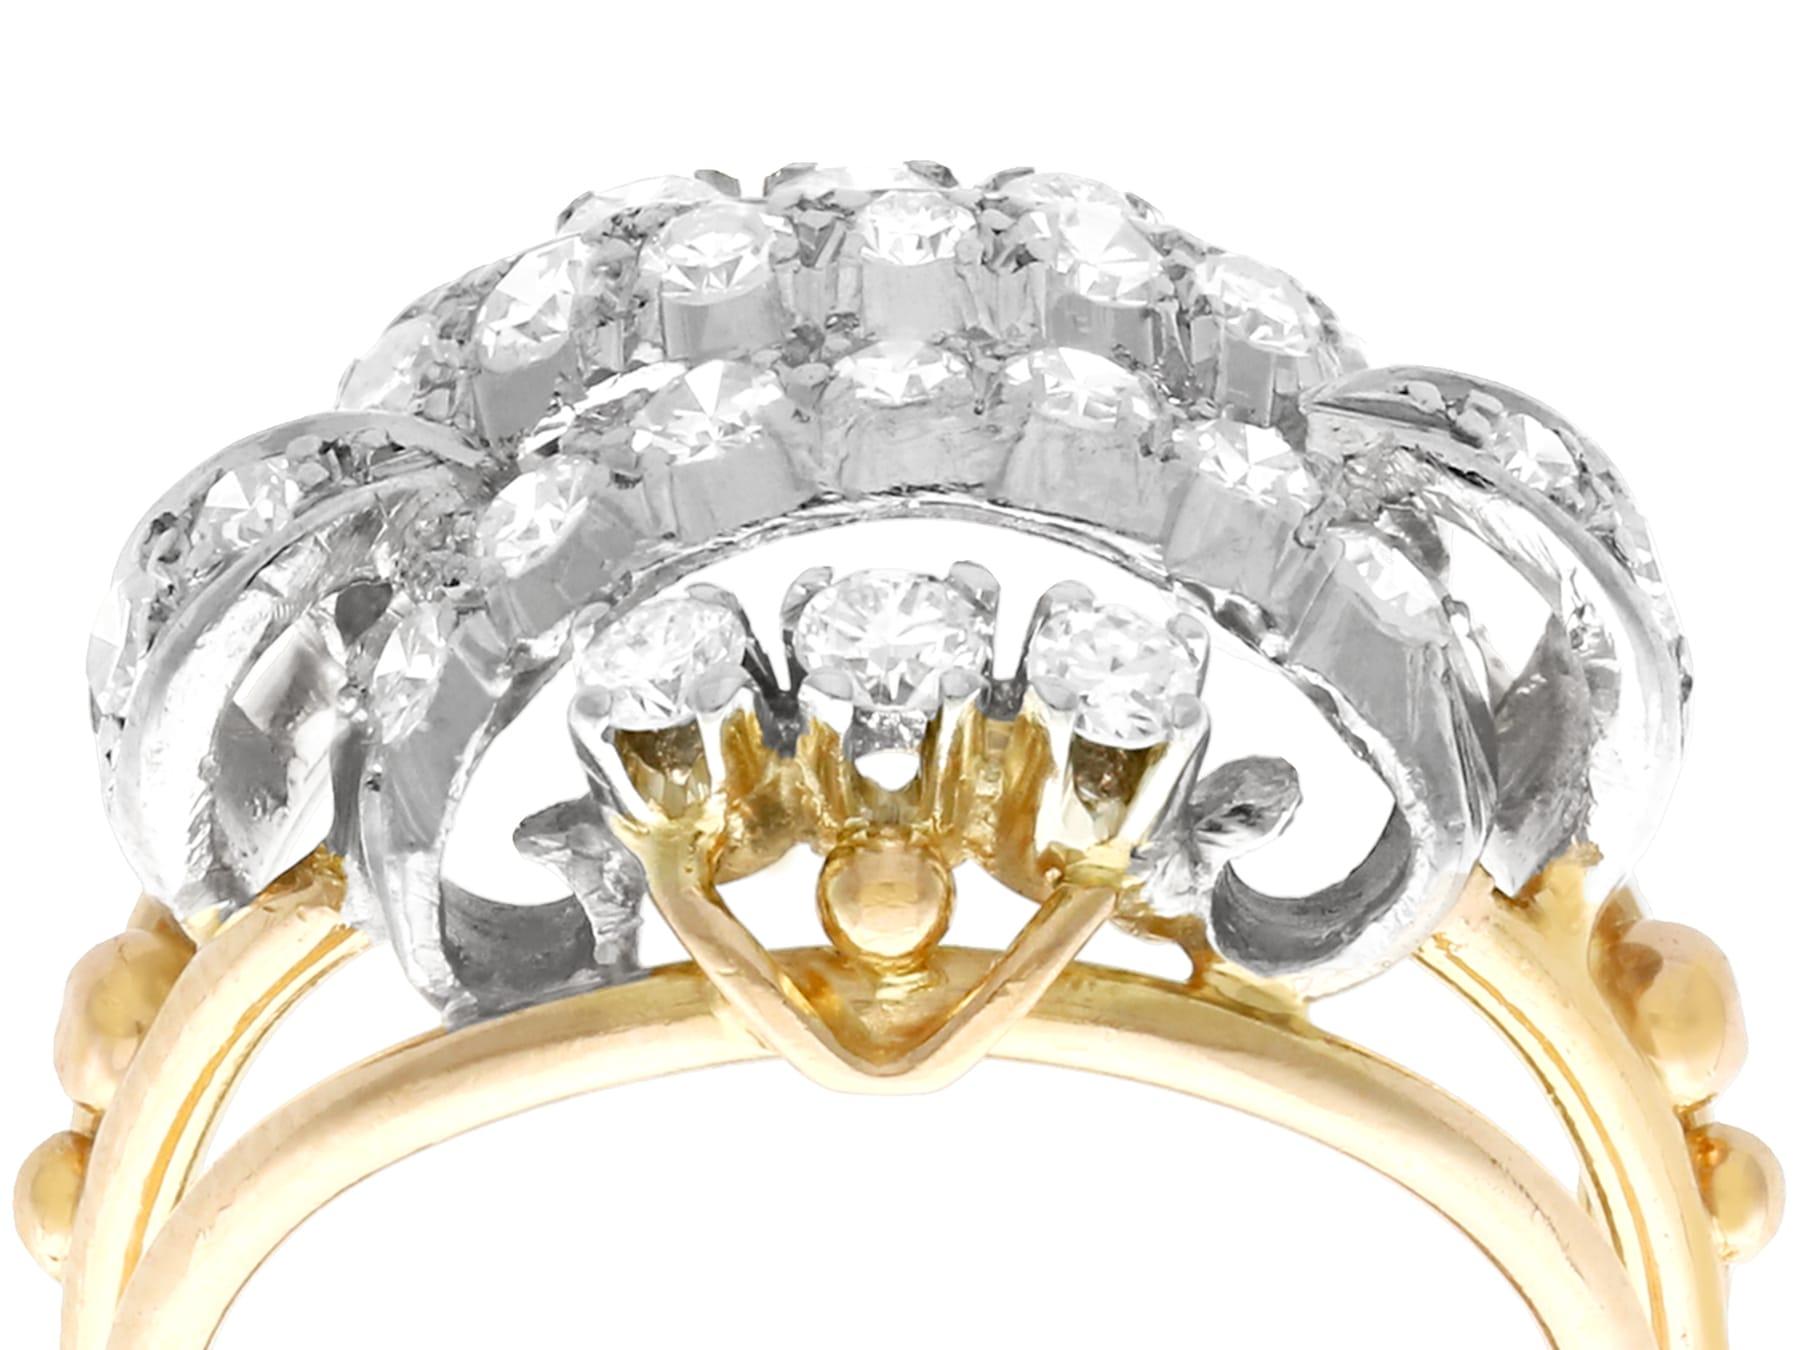 An impressive vintage 1950s 0.68 carat diamond and 18 karat yellow gold, 18 karat white gold cocktail ring; part of our diverse vintage jewelry collections.

This fine and impressive 1950s diamond cocktail ring has been crafted in 18k yellow gold